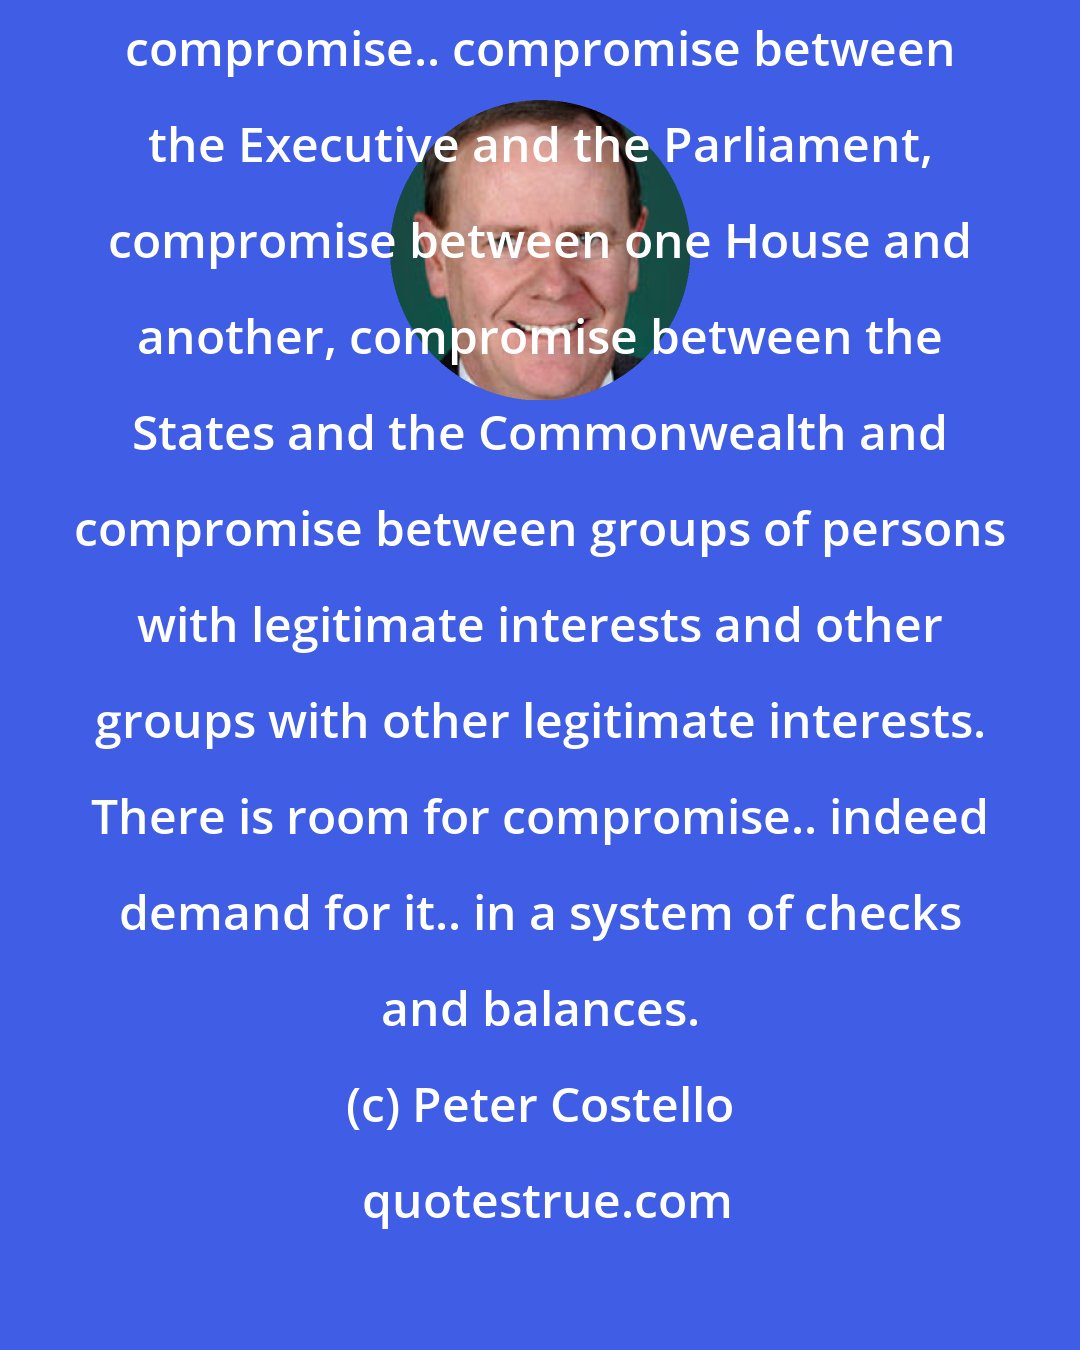 Peter Costello: Our system of government is one of checks and balances. It requires compromise.. compromise between the Executive and the Parliament, compromise between one House and another, compromise between the States and the Commonwealth and compromise between groups of persons with legitimate interests and other groups with other legitimate interests. There is room for compromise.. indeed demand for it.. in a system of checks and balances.